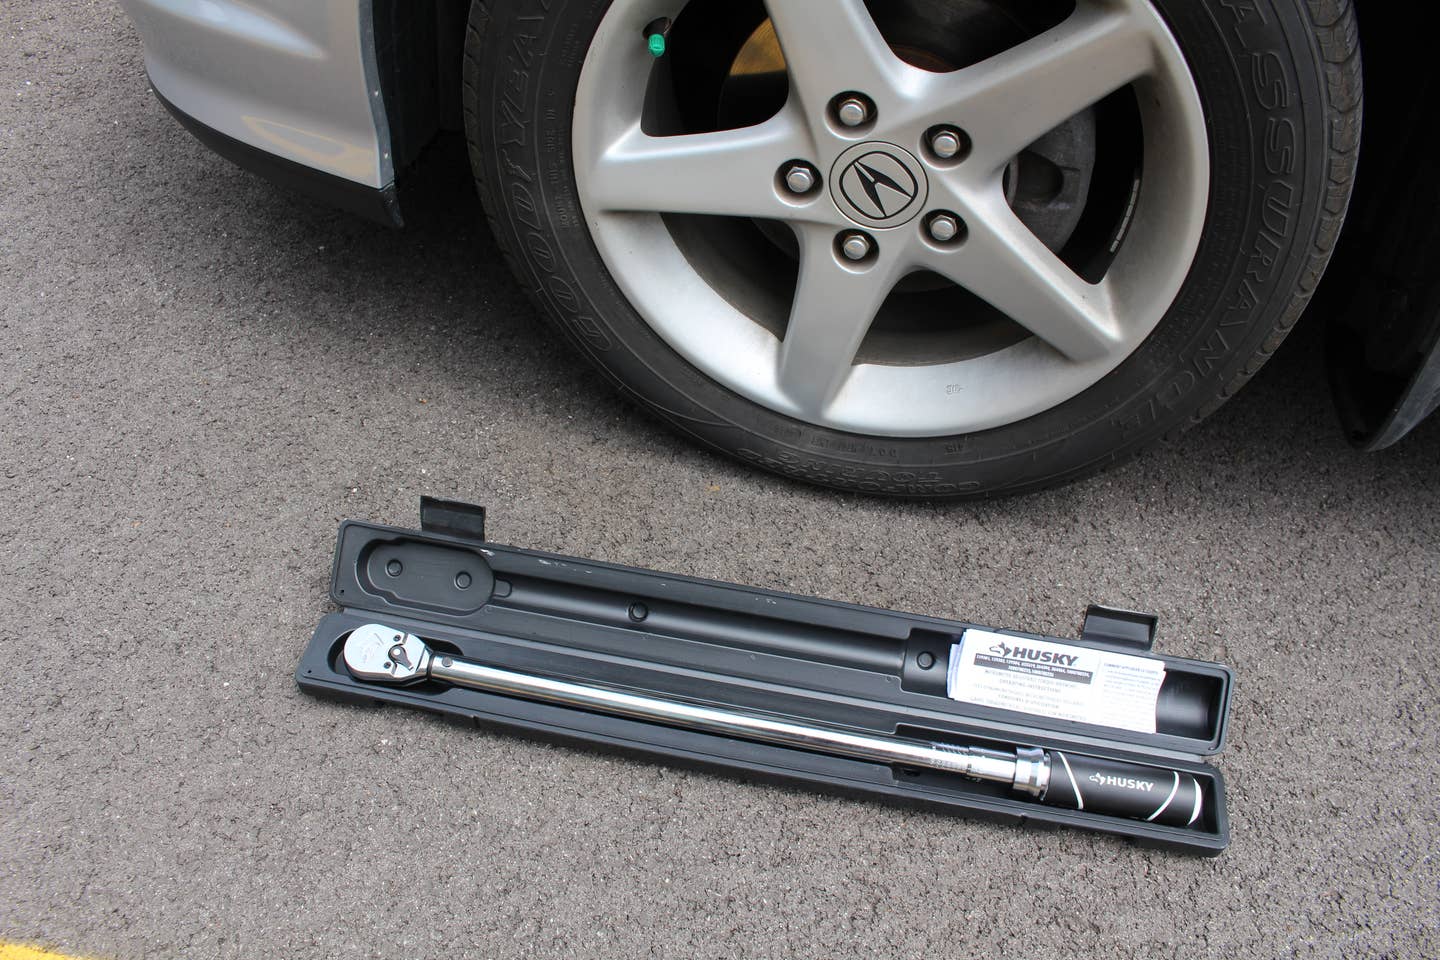 A husky torque wrench in its case on the ground next to an Acura RSX wheel.